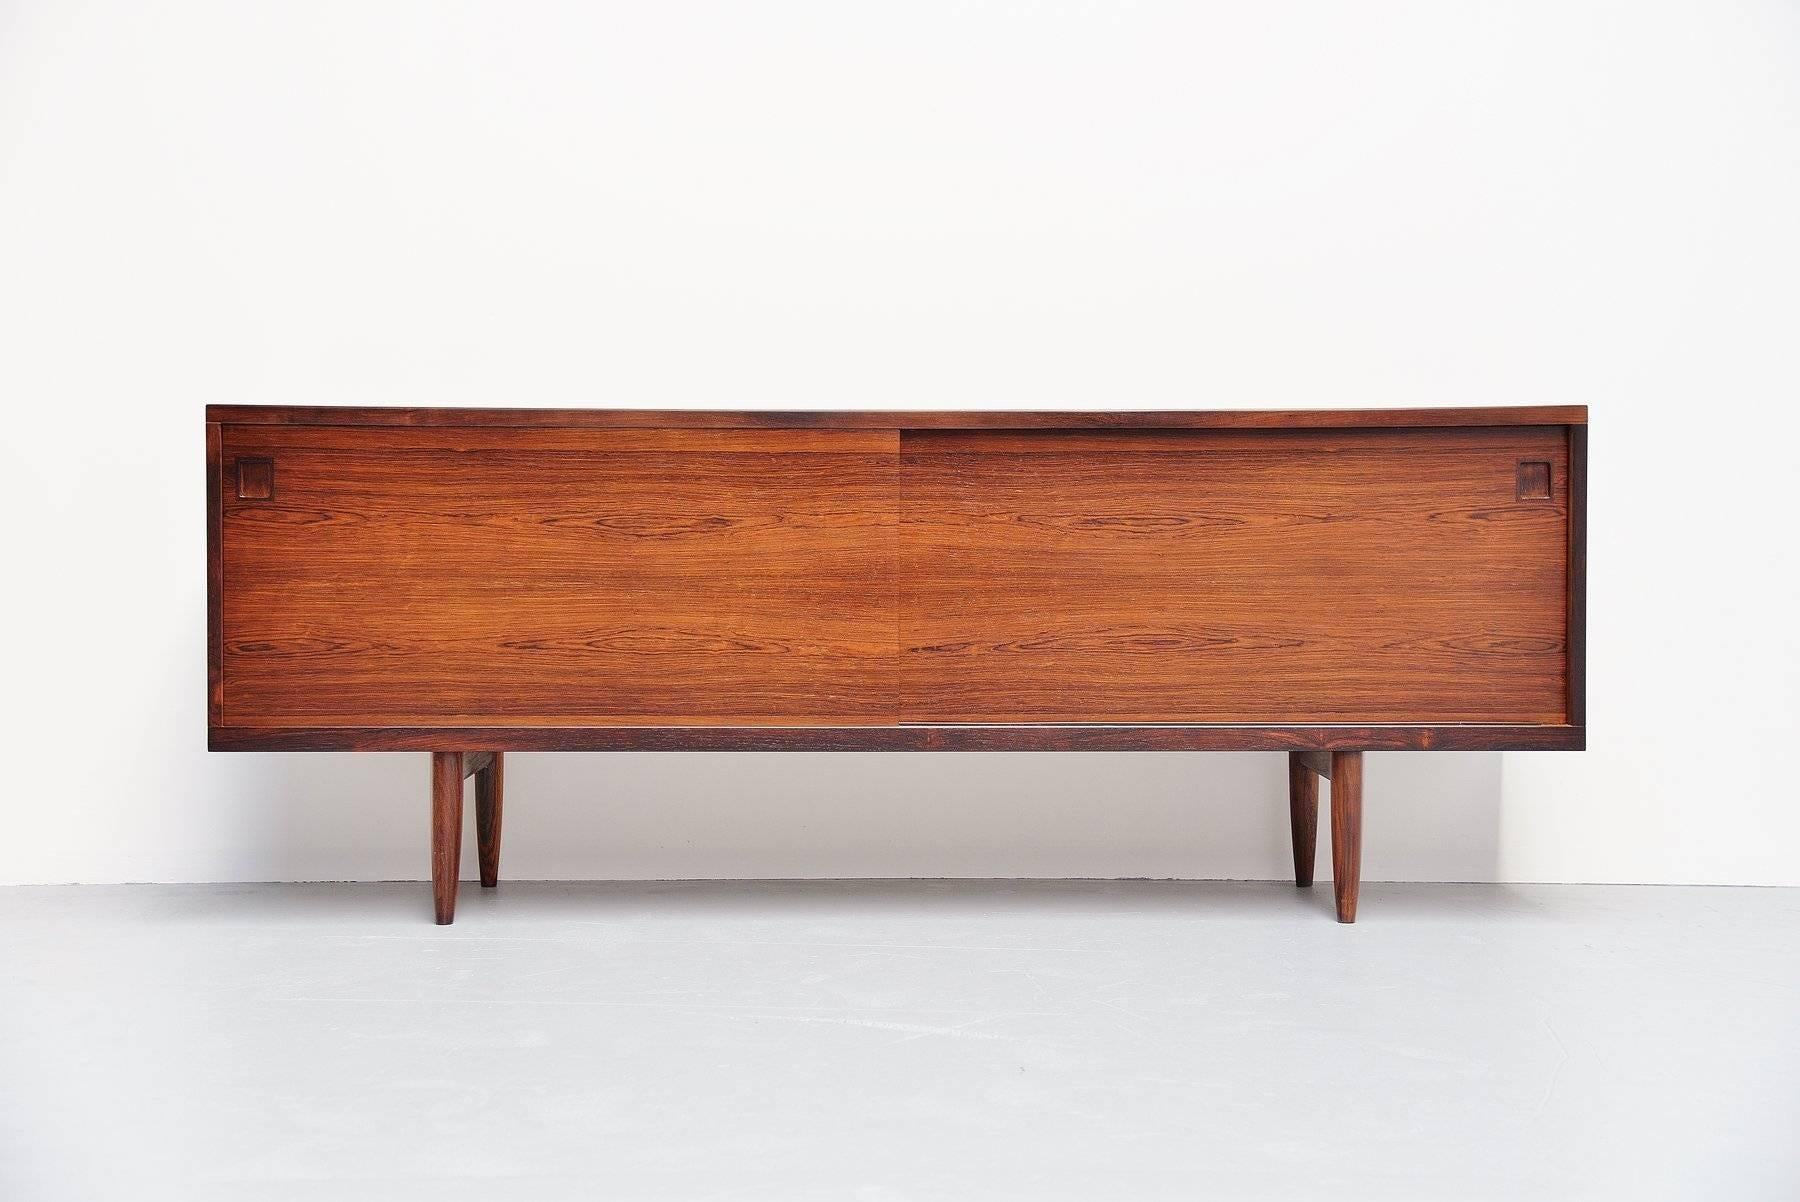 Superb quality sideboard designed by Niels Otto Moller produced by J.L. Møller Møbelfabrik, Denmark, 1960. This high quality made sideboard is made of rosewood, partly solid partly veneer. The sideboard has two sliding doors and shelves behind, even